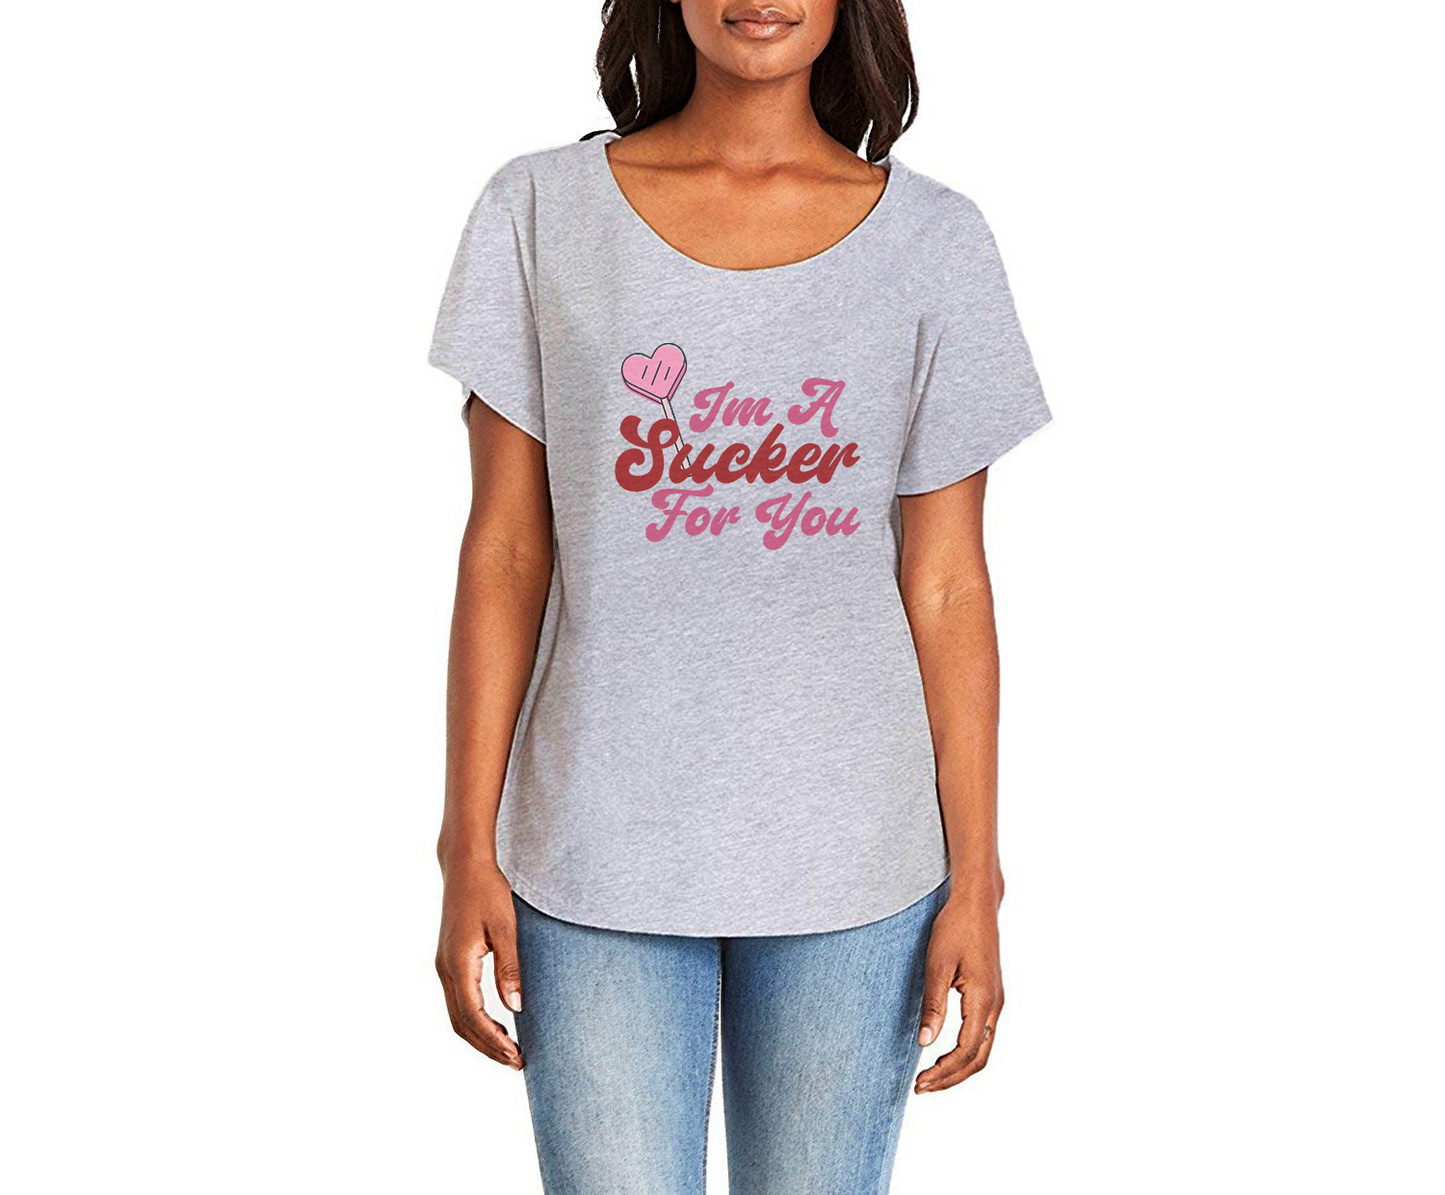 I'm A Sucker For You Ladies Tee Shirt - In Grey & White